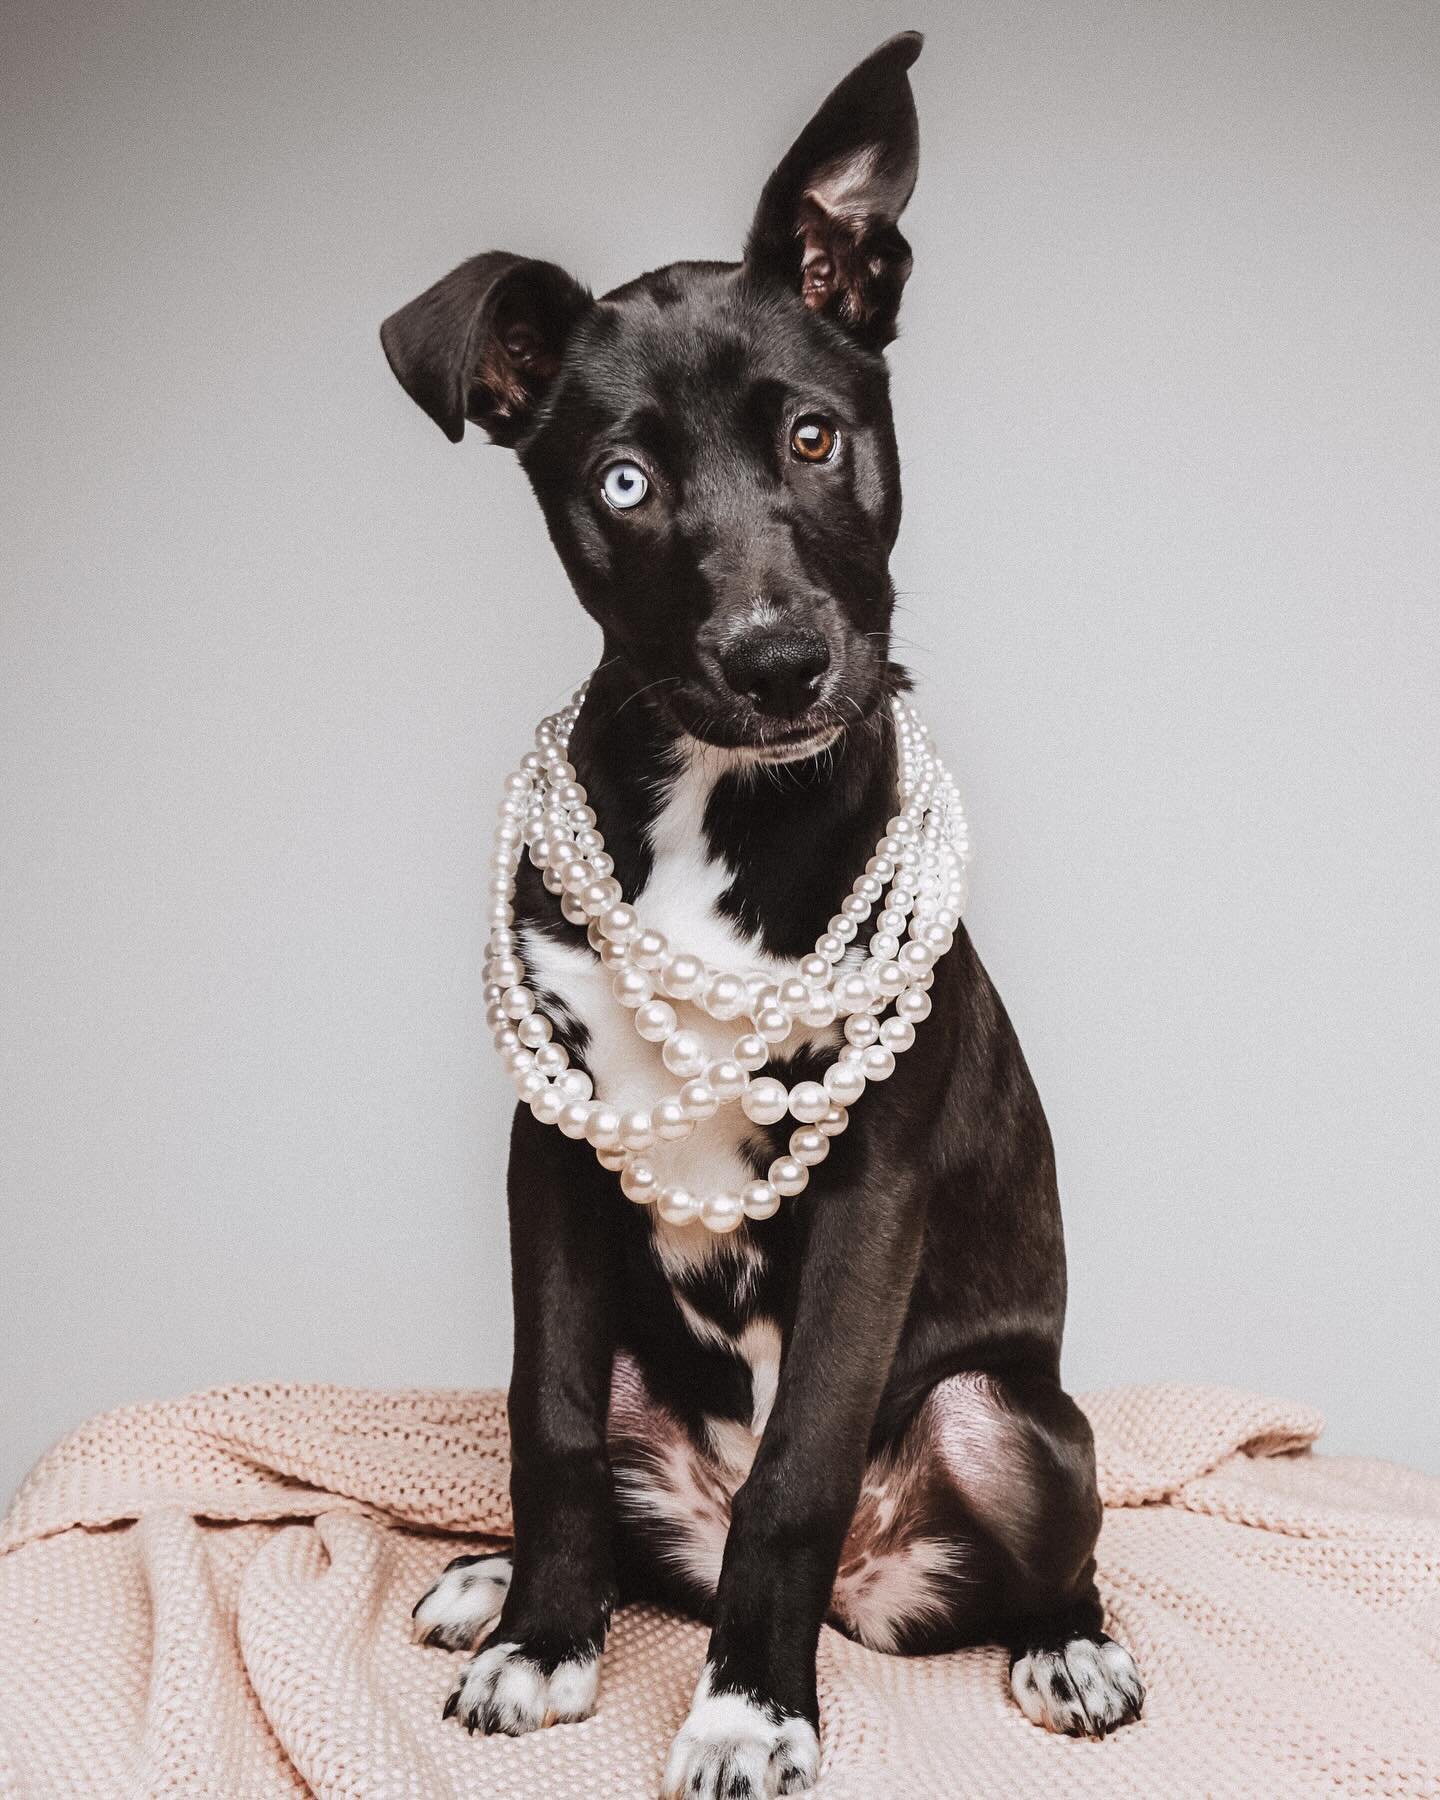 Did somebody say treat? 🐶 📸 

Book a lux photo shoot experience for your fur baby today! 💕

Link in bio 

#studio1000 #petphotography #dogphotography